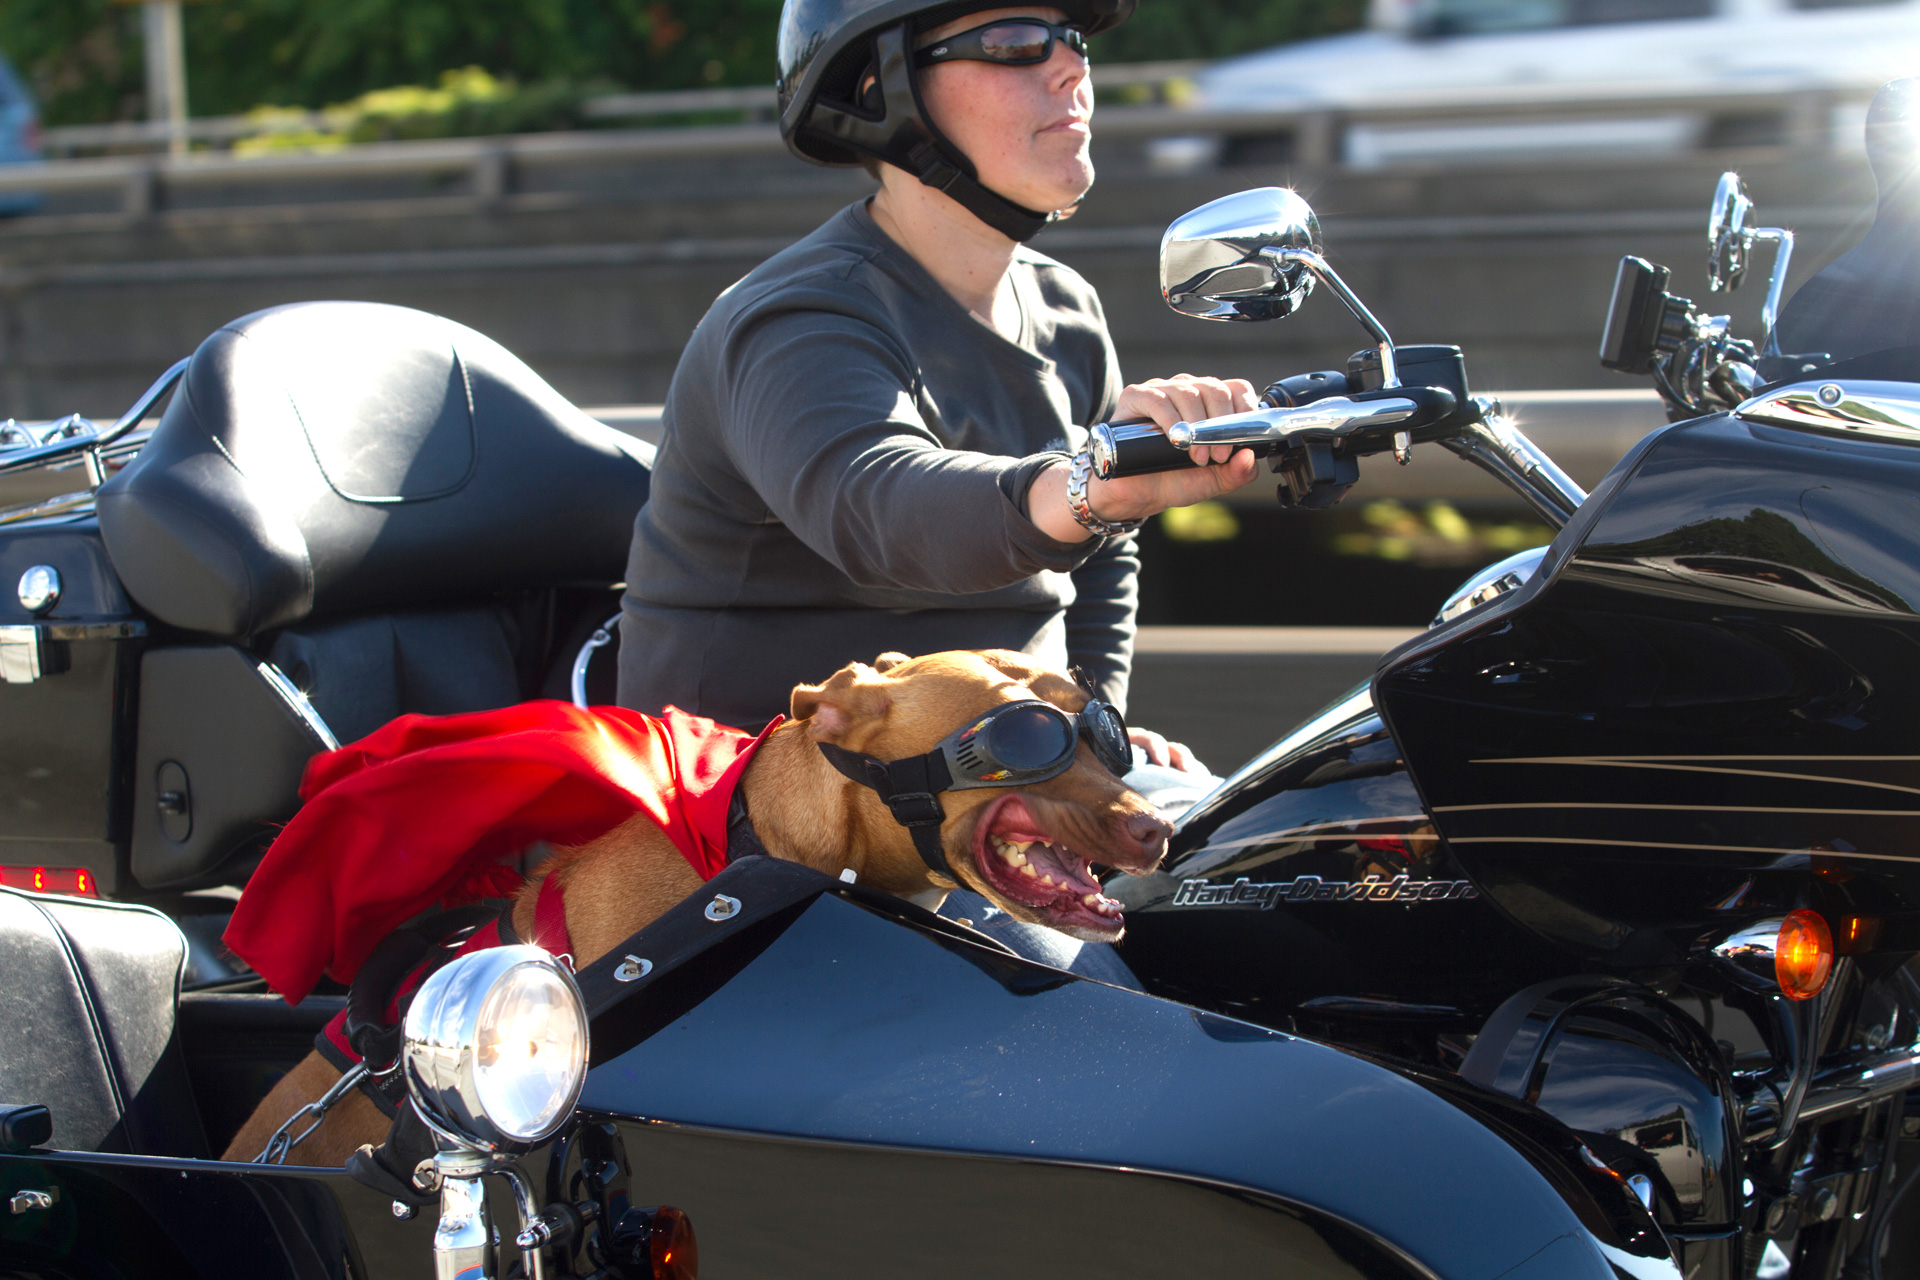 Pit bull mix, Lucy, rides in a sidecar next to her mom, Brande Schweitzer, who drives a Harley-Davidson, in Seattle, Washington. Schweitzer and her dog attract attention wherever they go. (© copyright Karen Ducey)